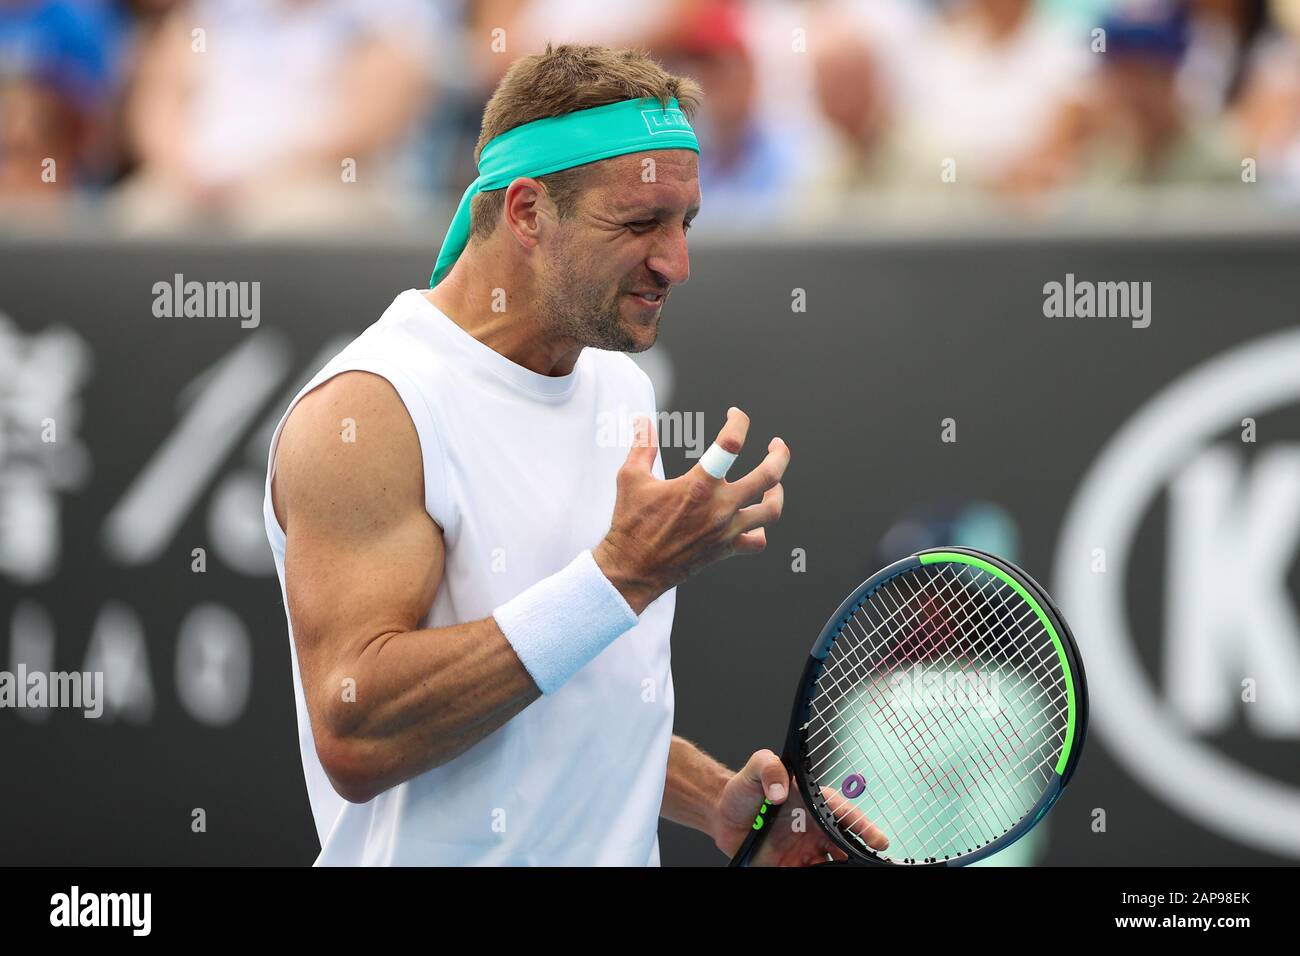 Australia. 22nd Jan, 2019. Tennys Sandgren of USA defeated Matteo Berrettini of in a set thriller 7-6 6-4 4-6 2-6 7-5 during second round match at the ATP